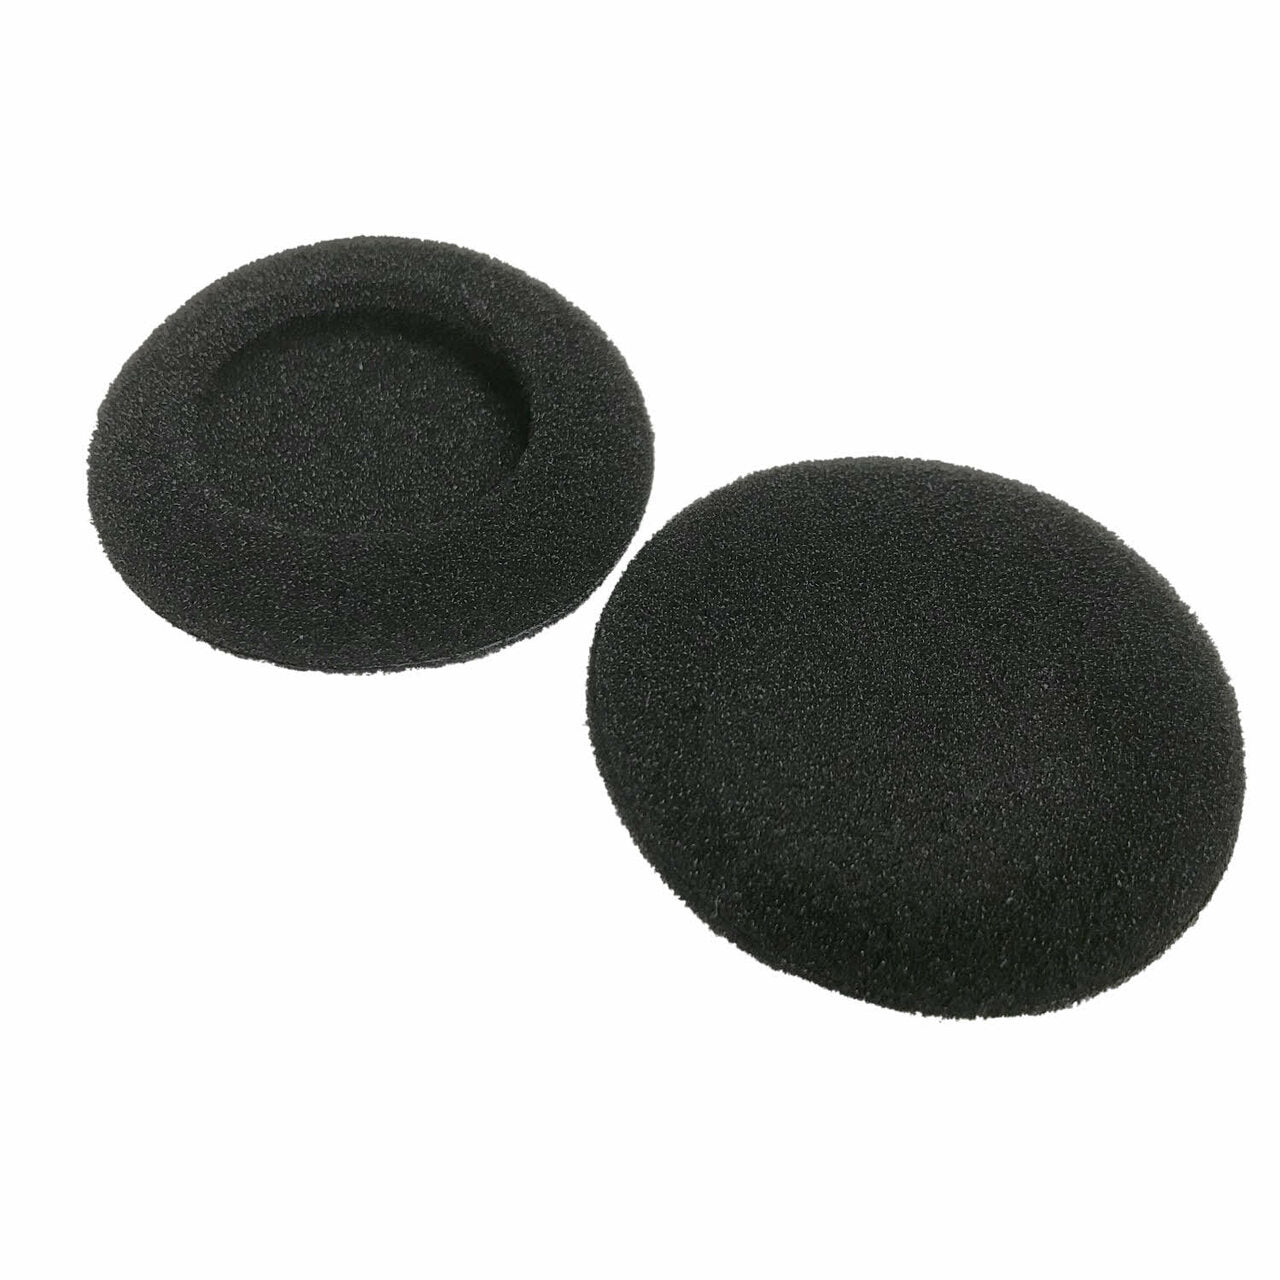 Replacement Foam Earpiece Covers for 2Talks, Sena and Expand Boom Mesh | replacement-foam-earpiece-covers-for-2talks-sena-and-expand-boom-mesh | Sena | Communication